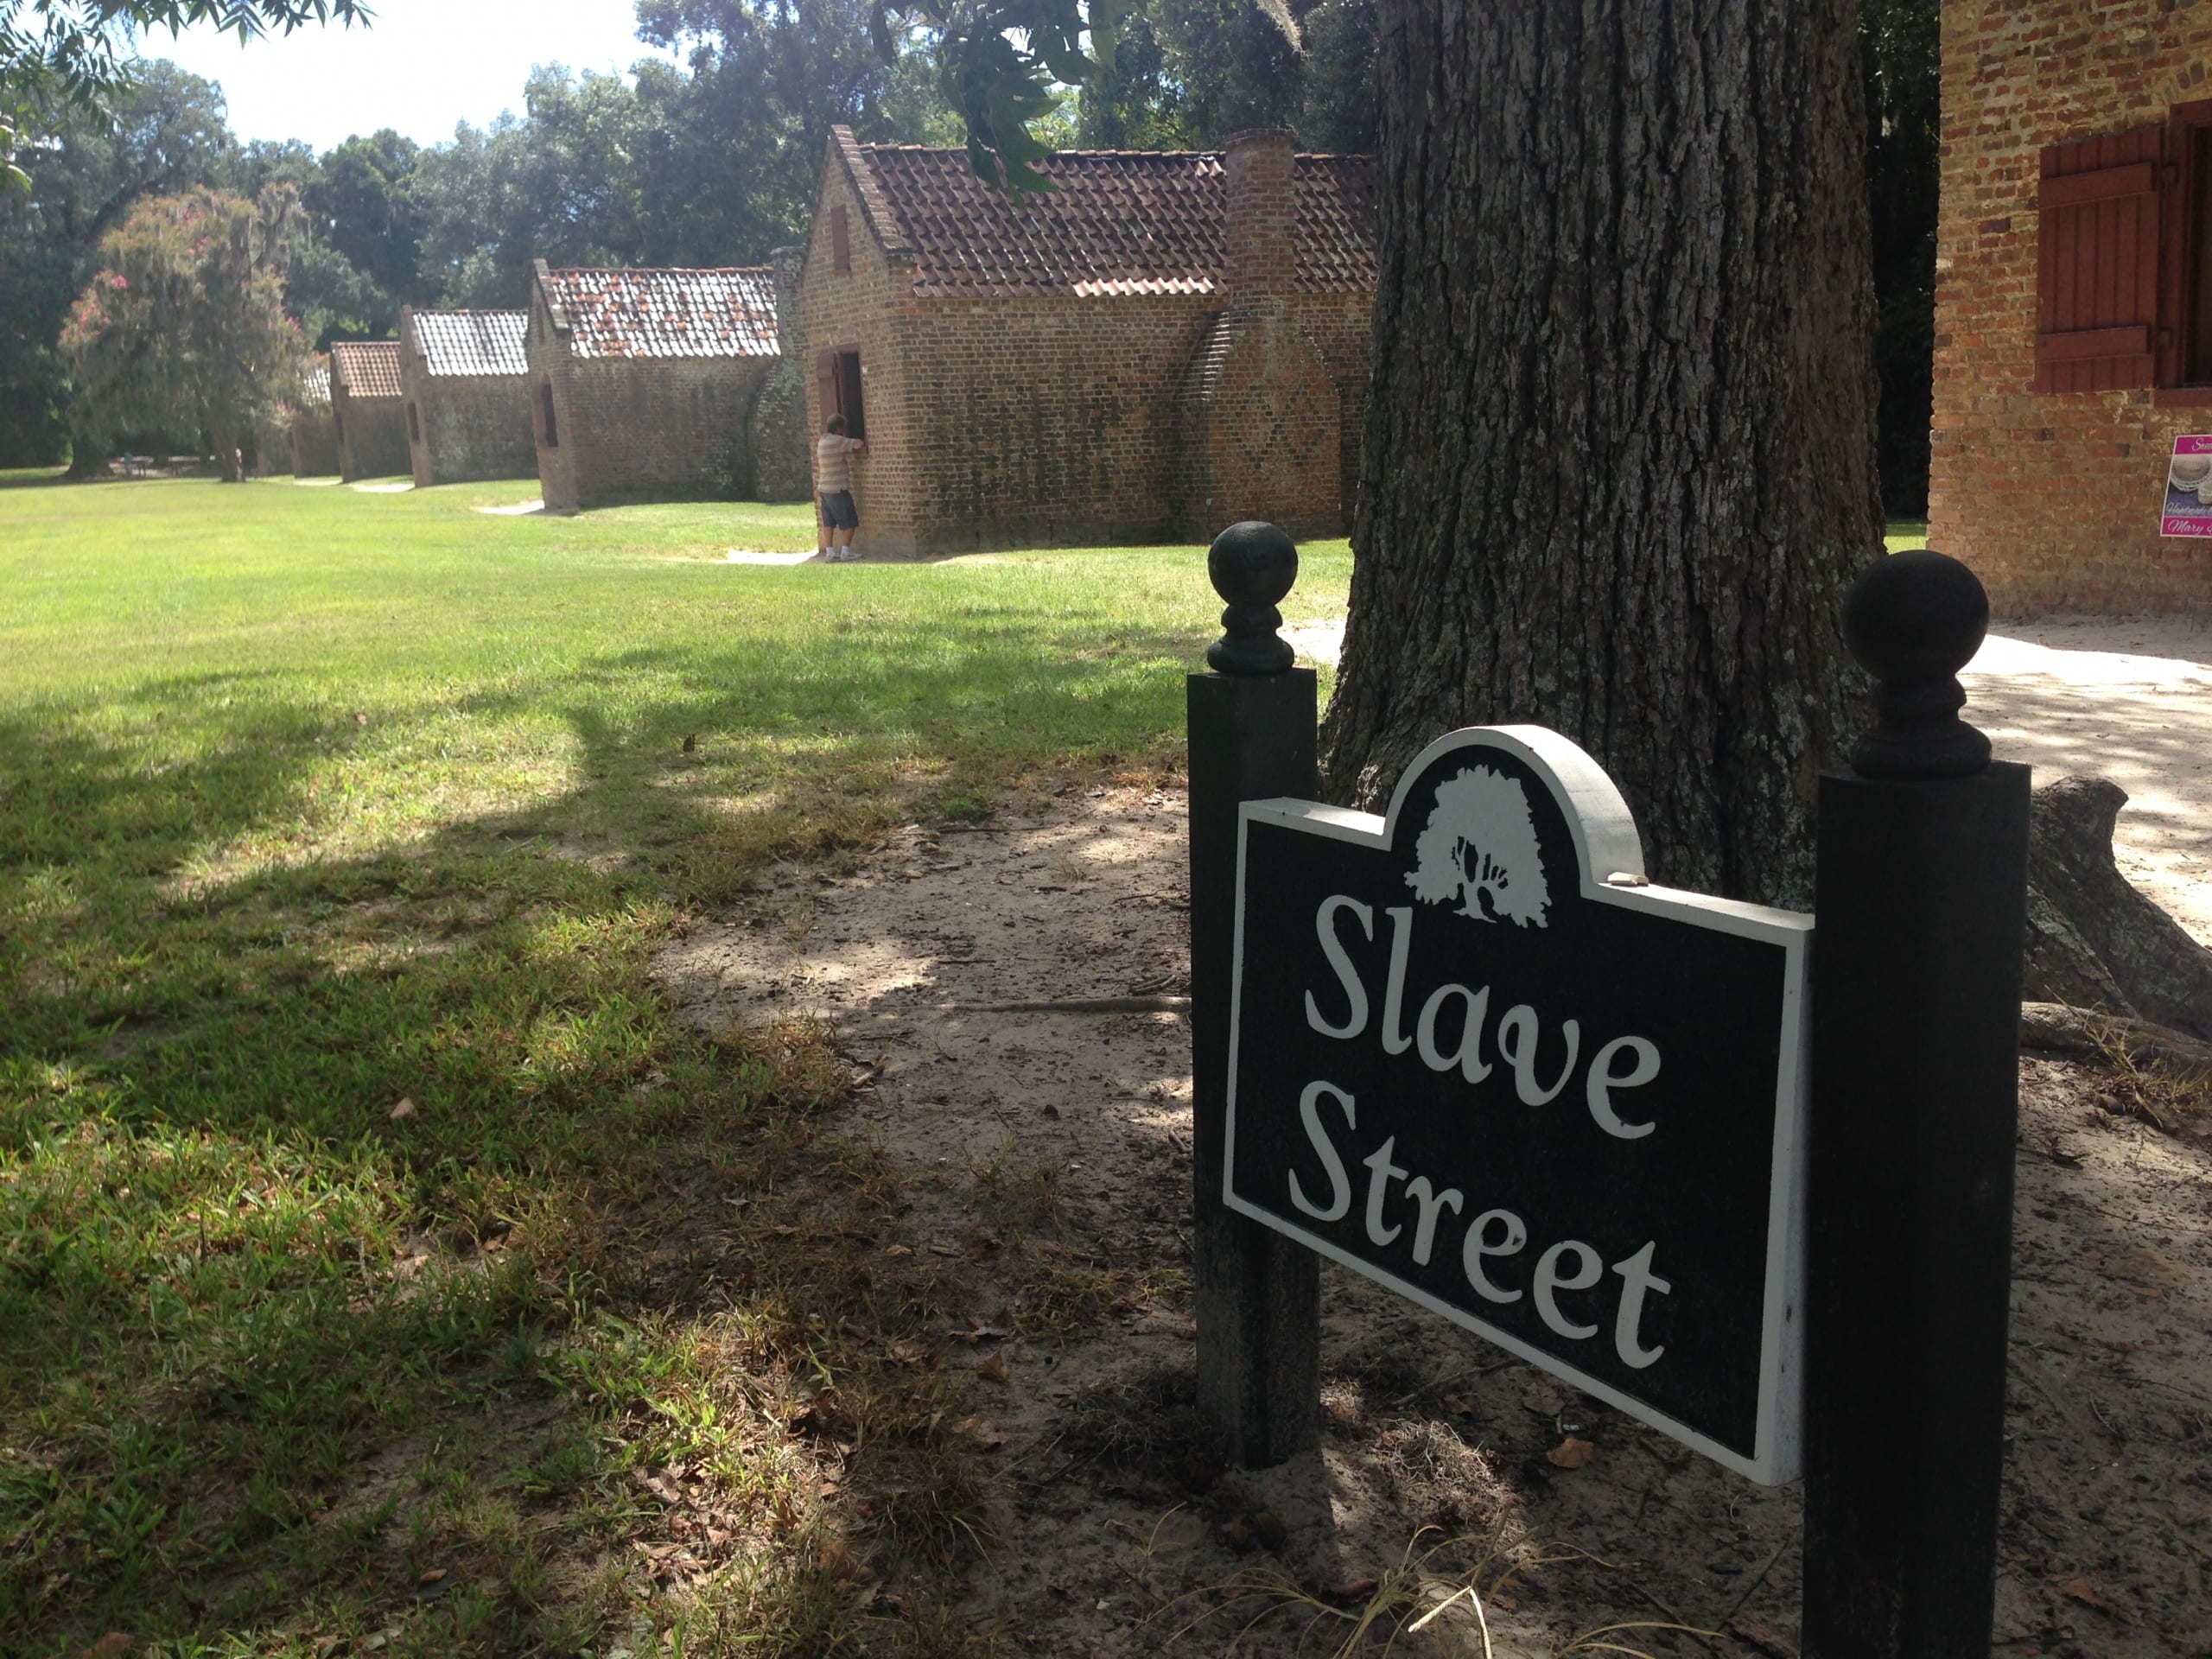 a sign that reads "slave stret" with three cabins in the background